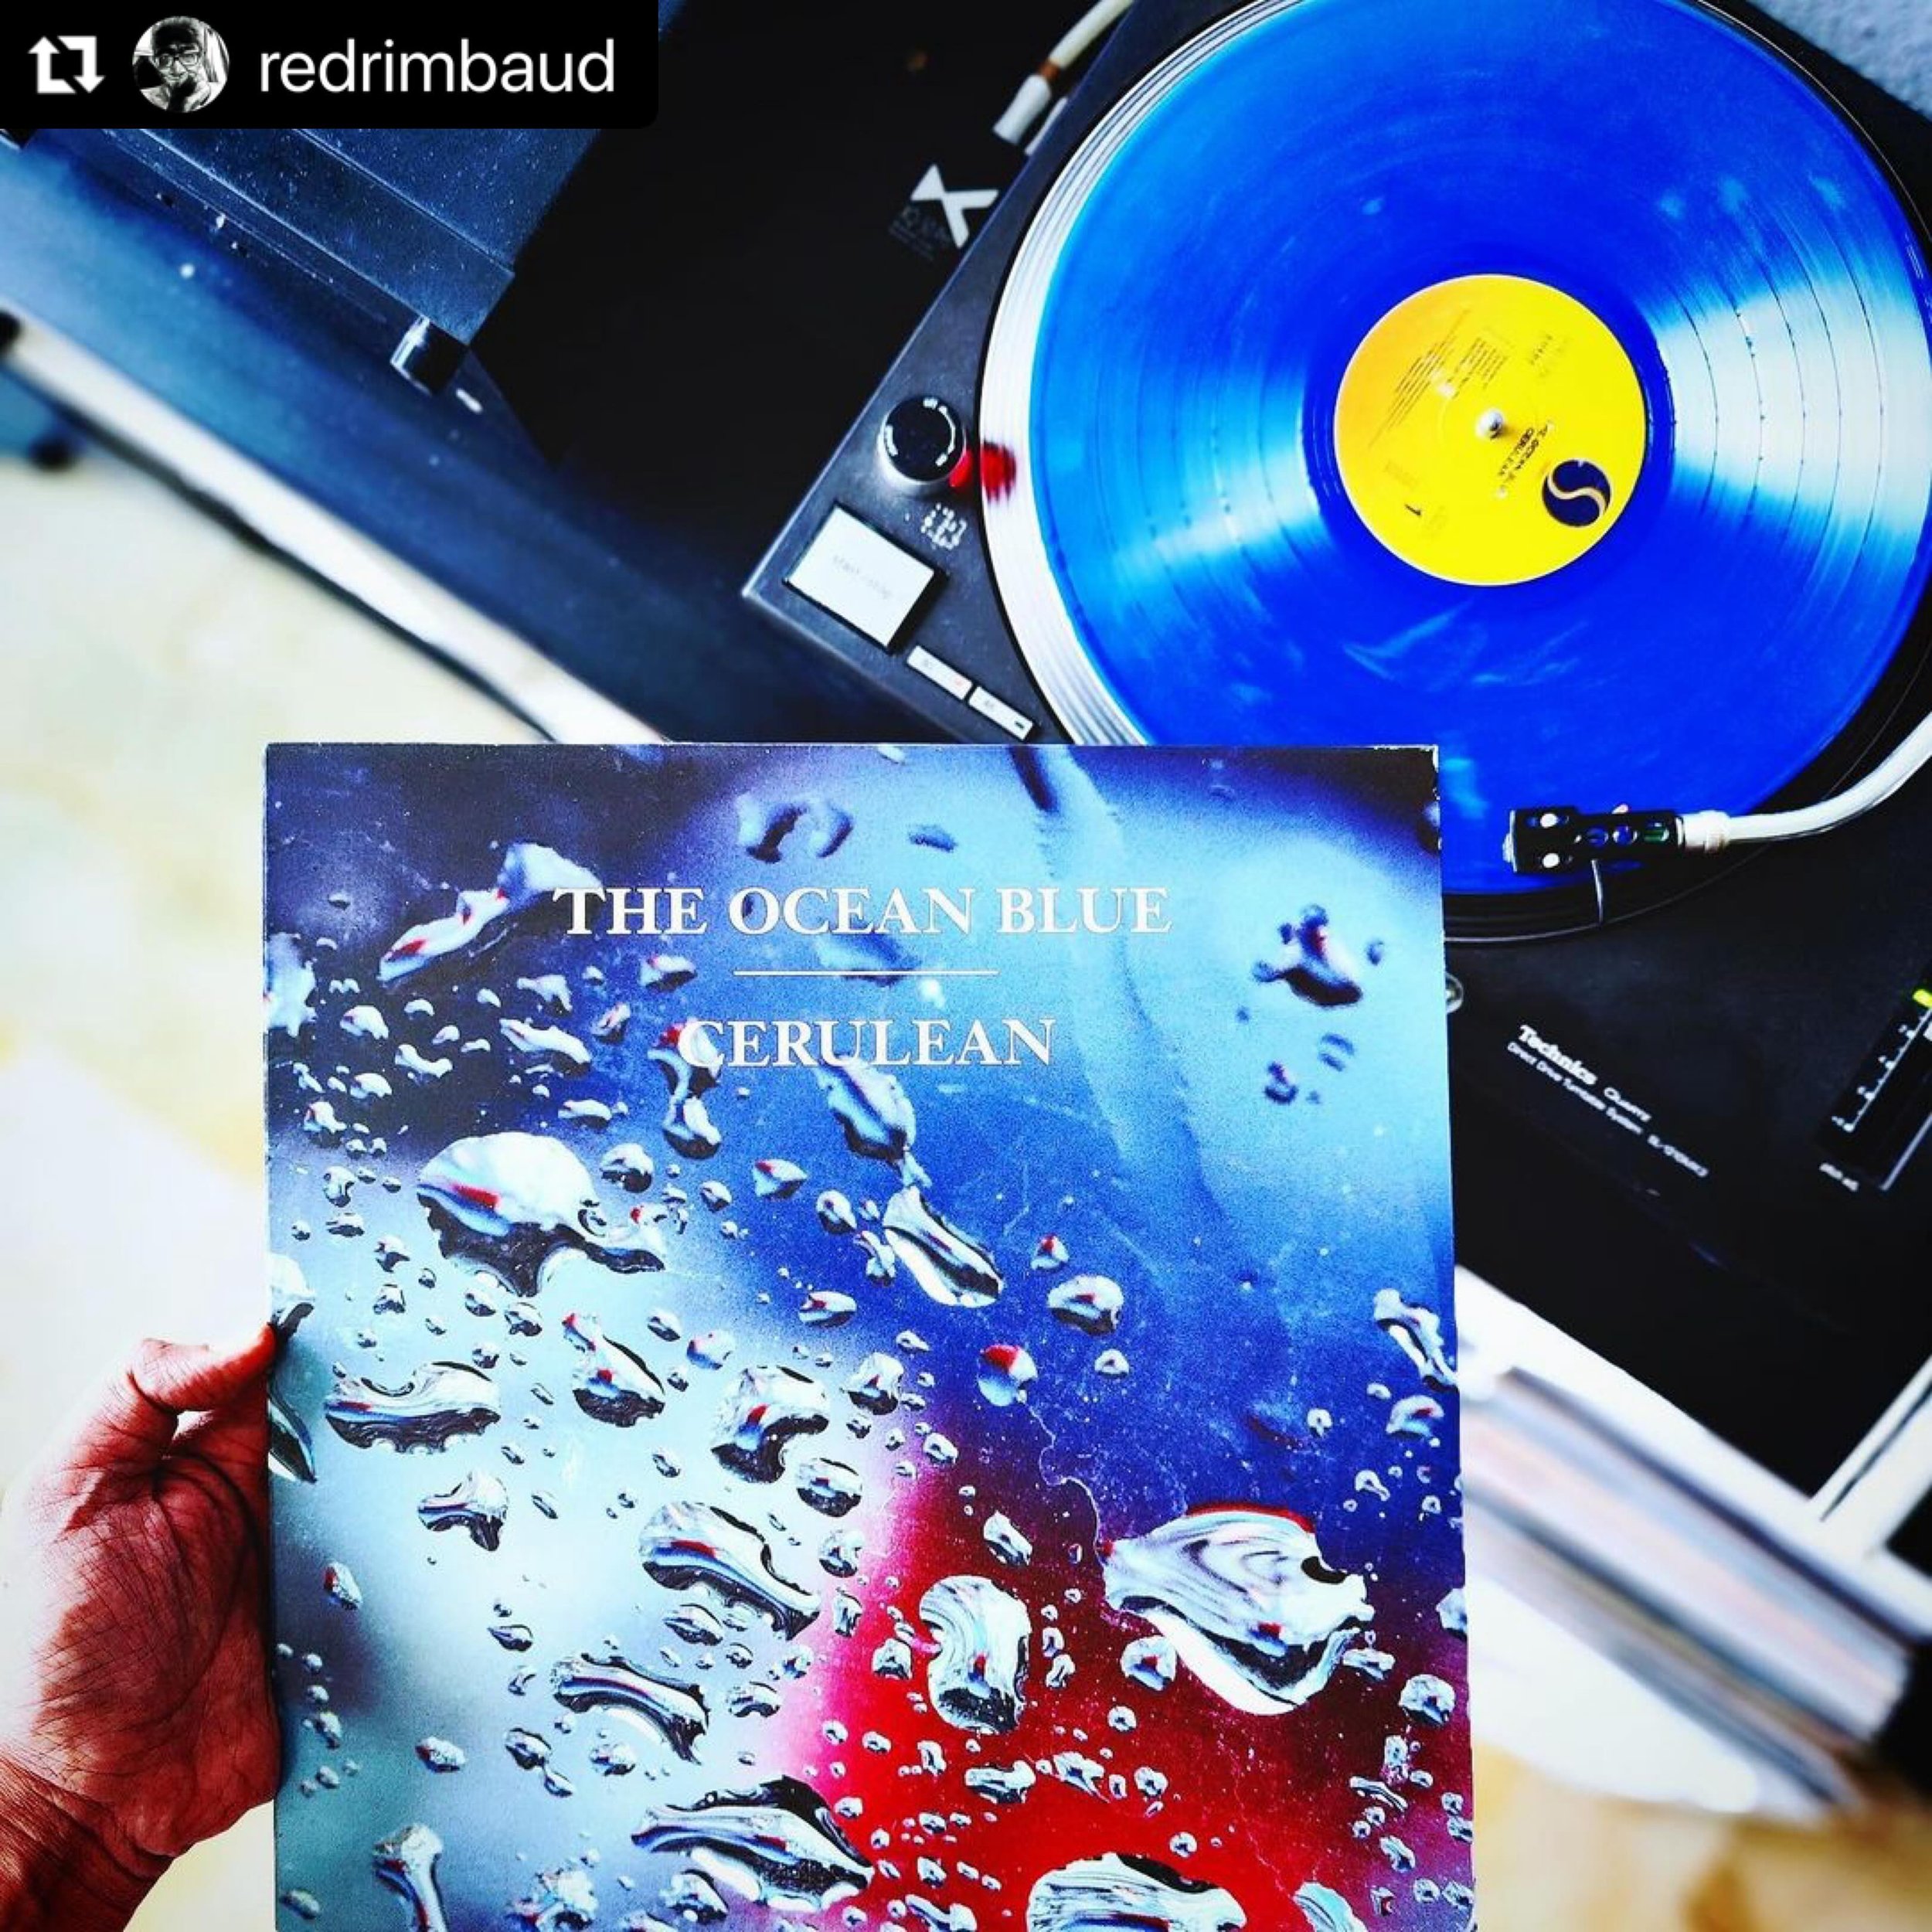 #Repost @redrimbaud 💧
・・・
⠀
The Ocean Blue - Cerulean (1991/2015)⠀
⠀
~~~~~~⠀
⠀
A most perfectly crafted indie dreampop album from more than 30 years ago by one of the bands that should have been bigger than they were. Glorious chiming guitars, float